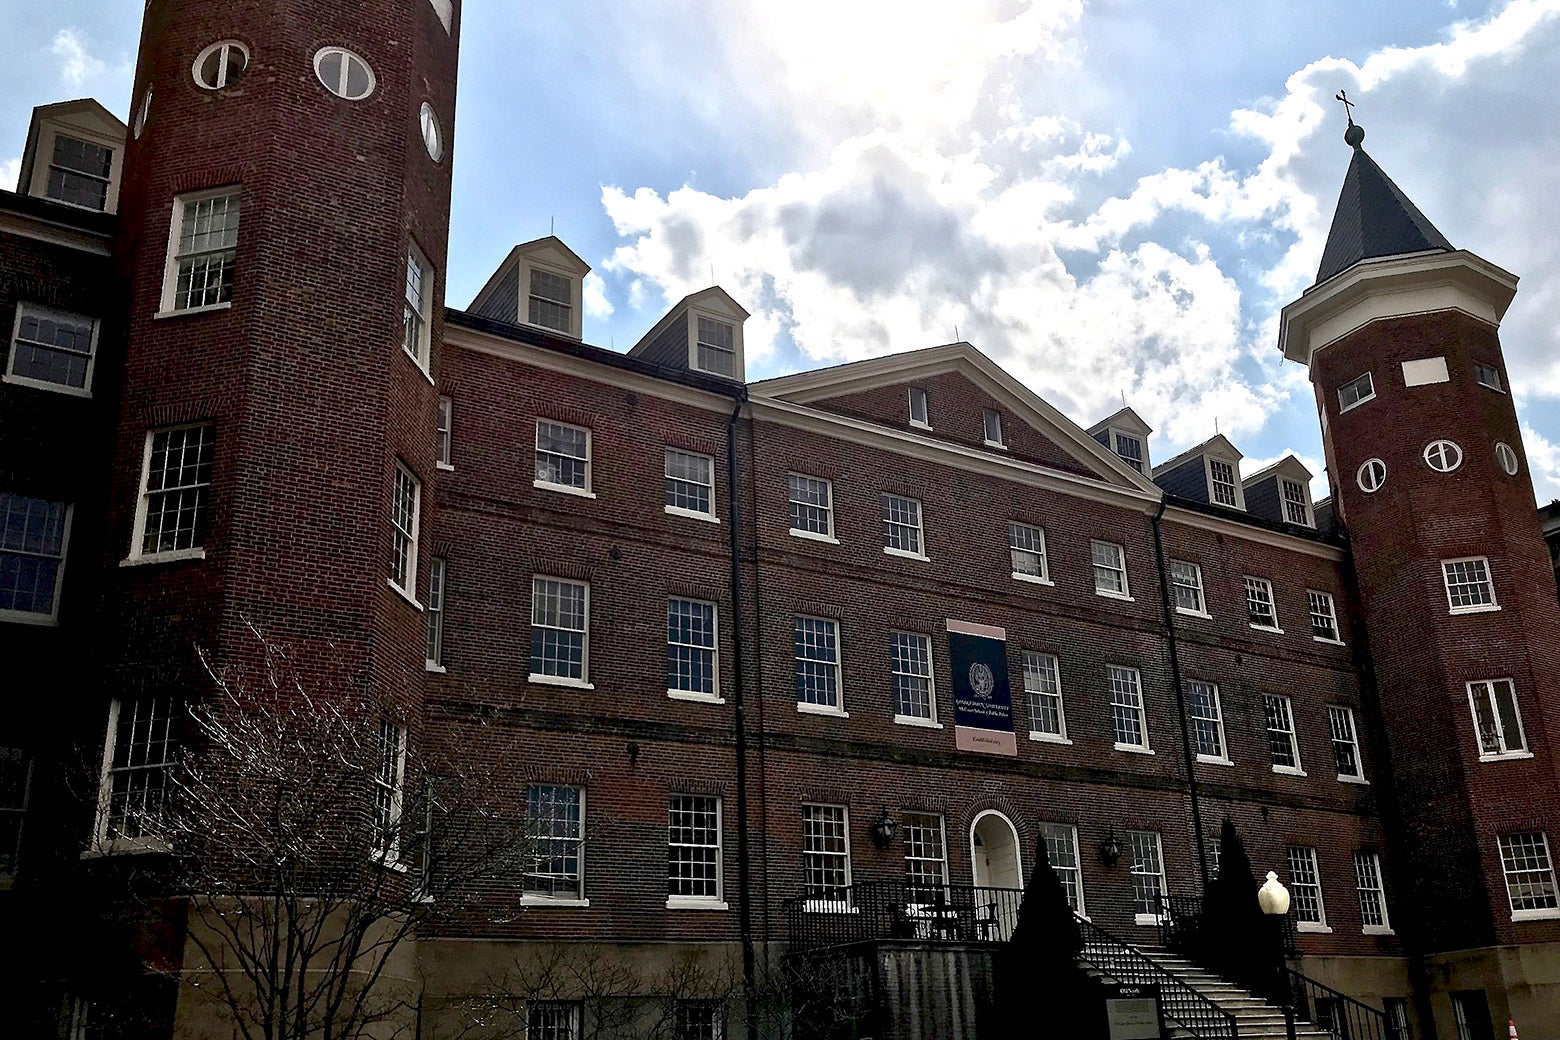 The stately red brick 3-story Old North Hall on the Georgetown University campus.